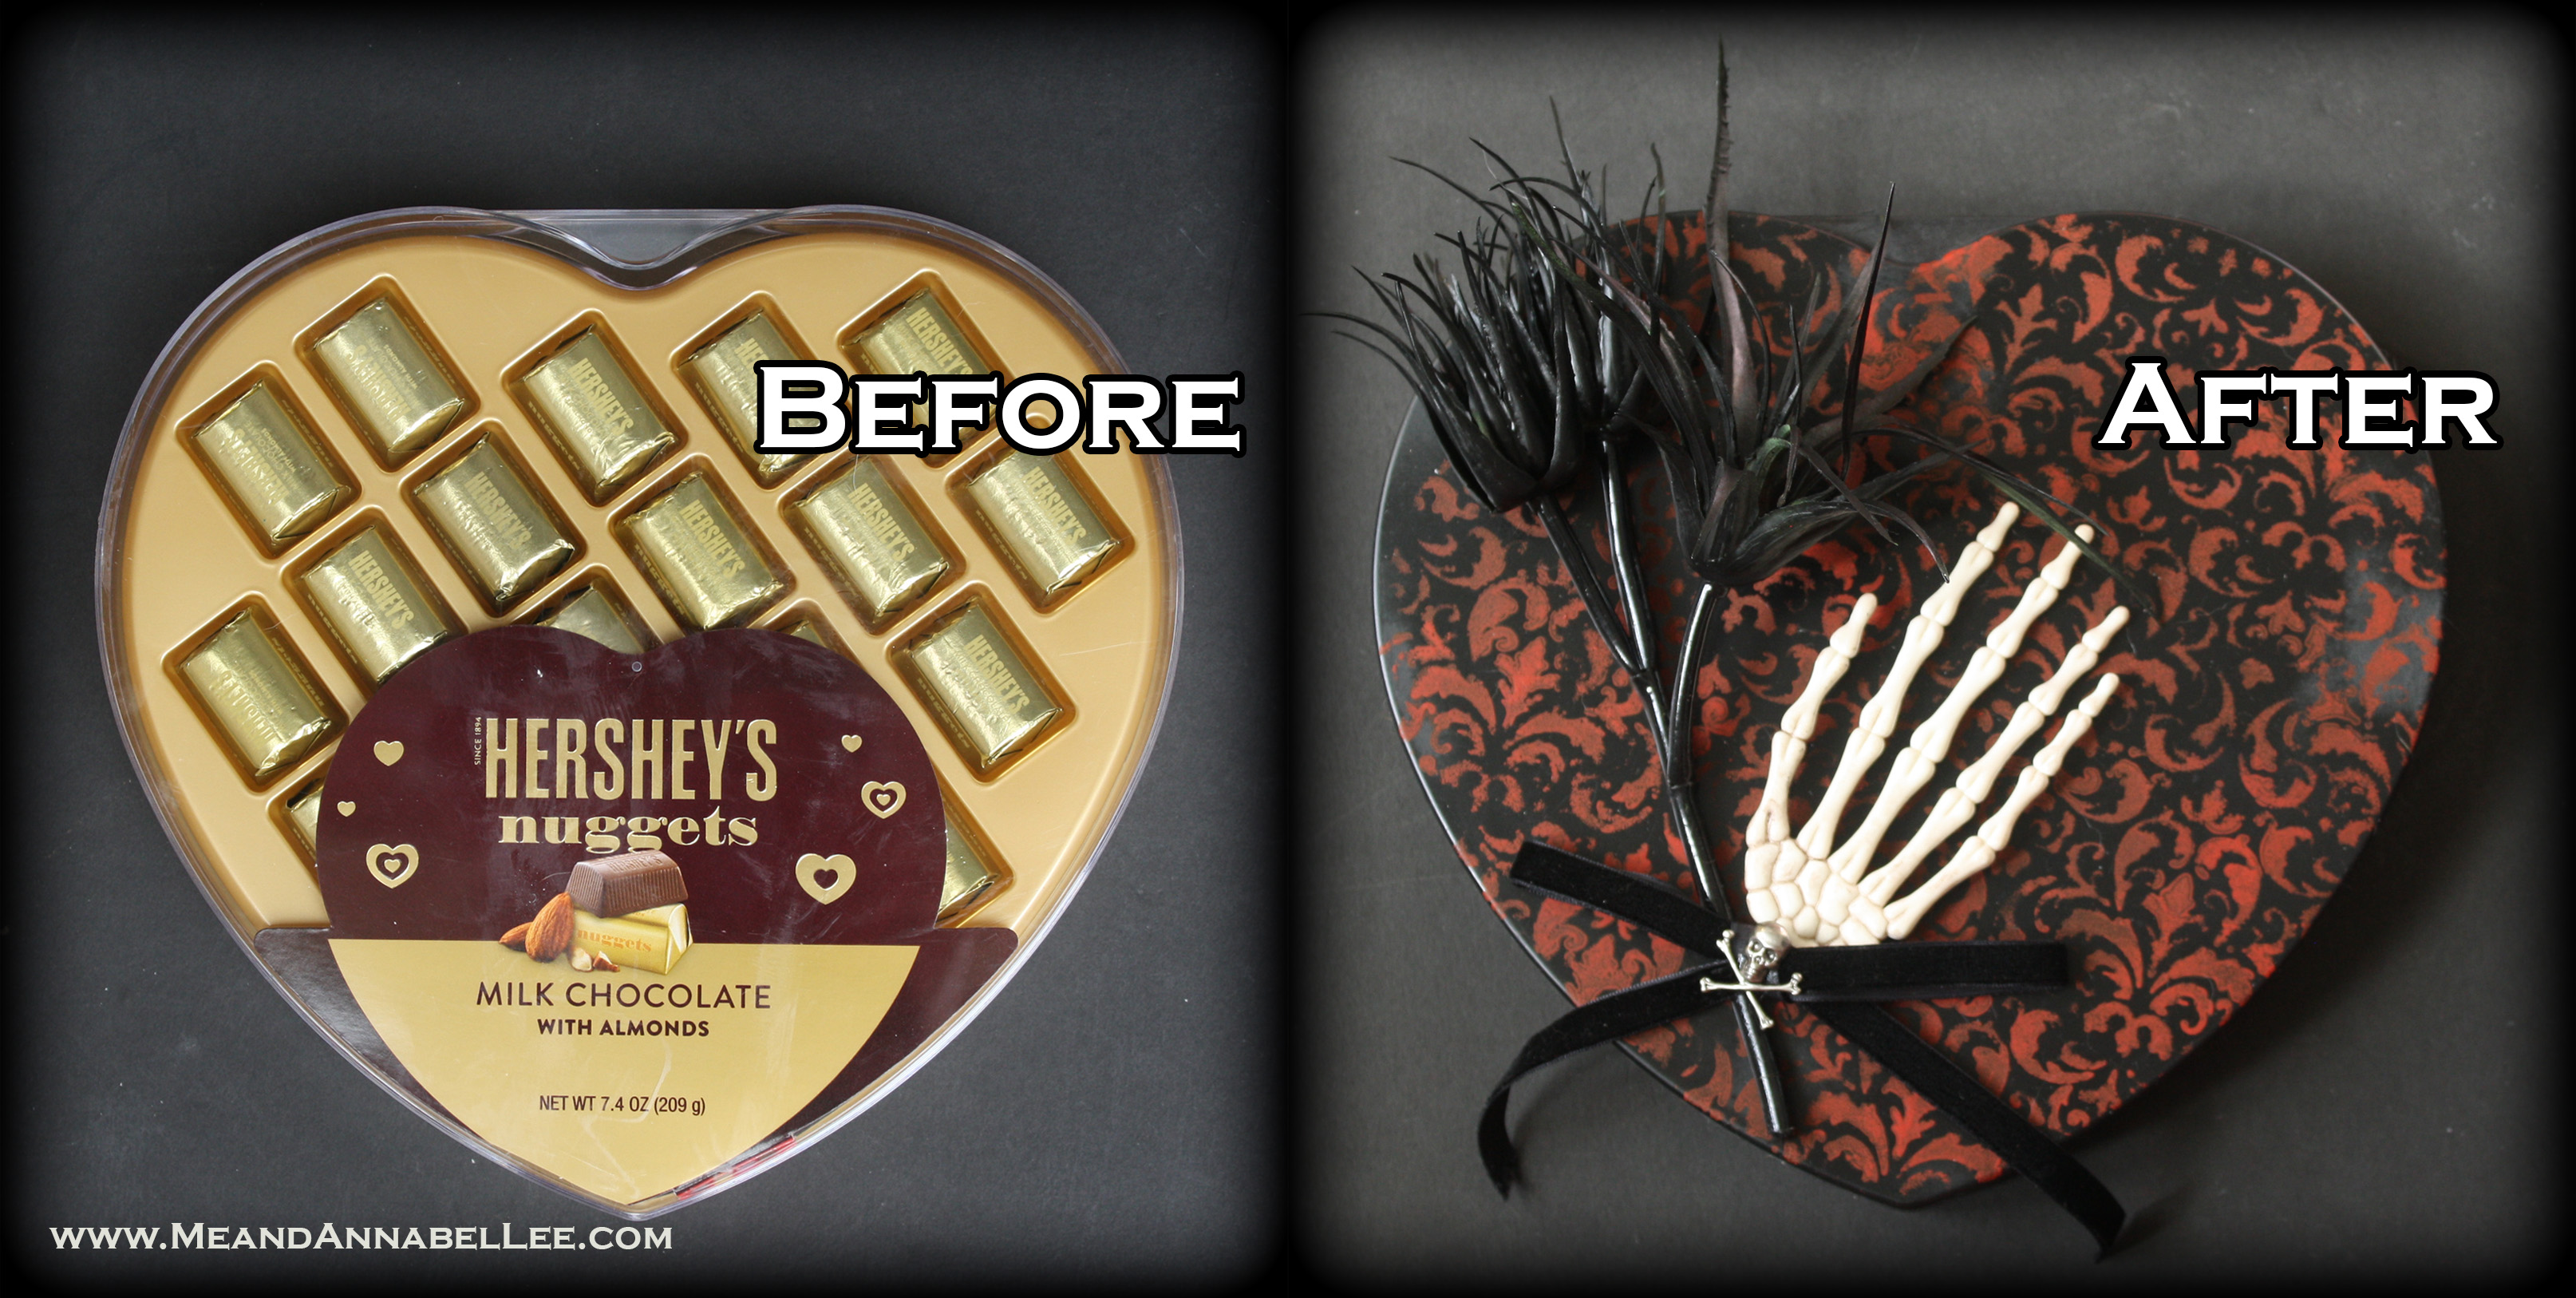 DIY Victorian Gothic Valentine Box of Chocolates | Before & After Black Red Damask Heart and skeleton Hand | Dark Romance | www.MeandAnnabelLee.com